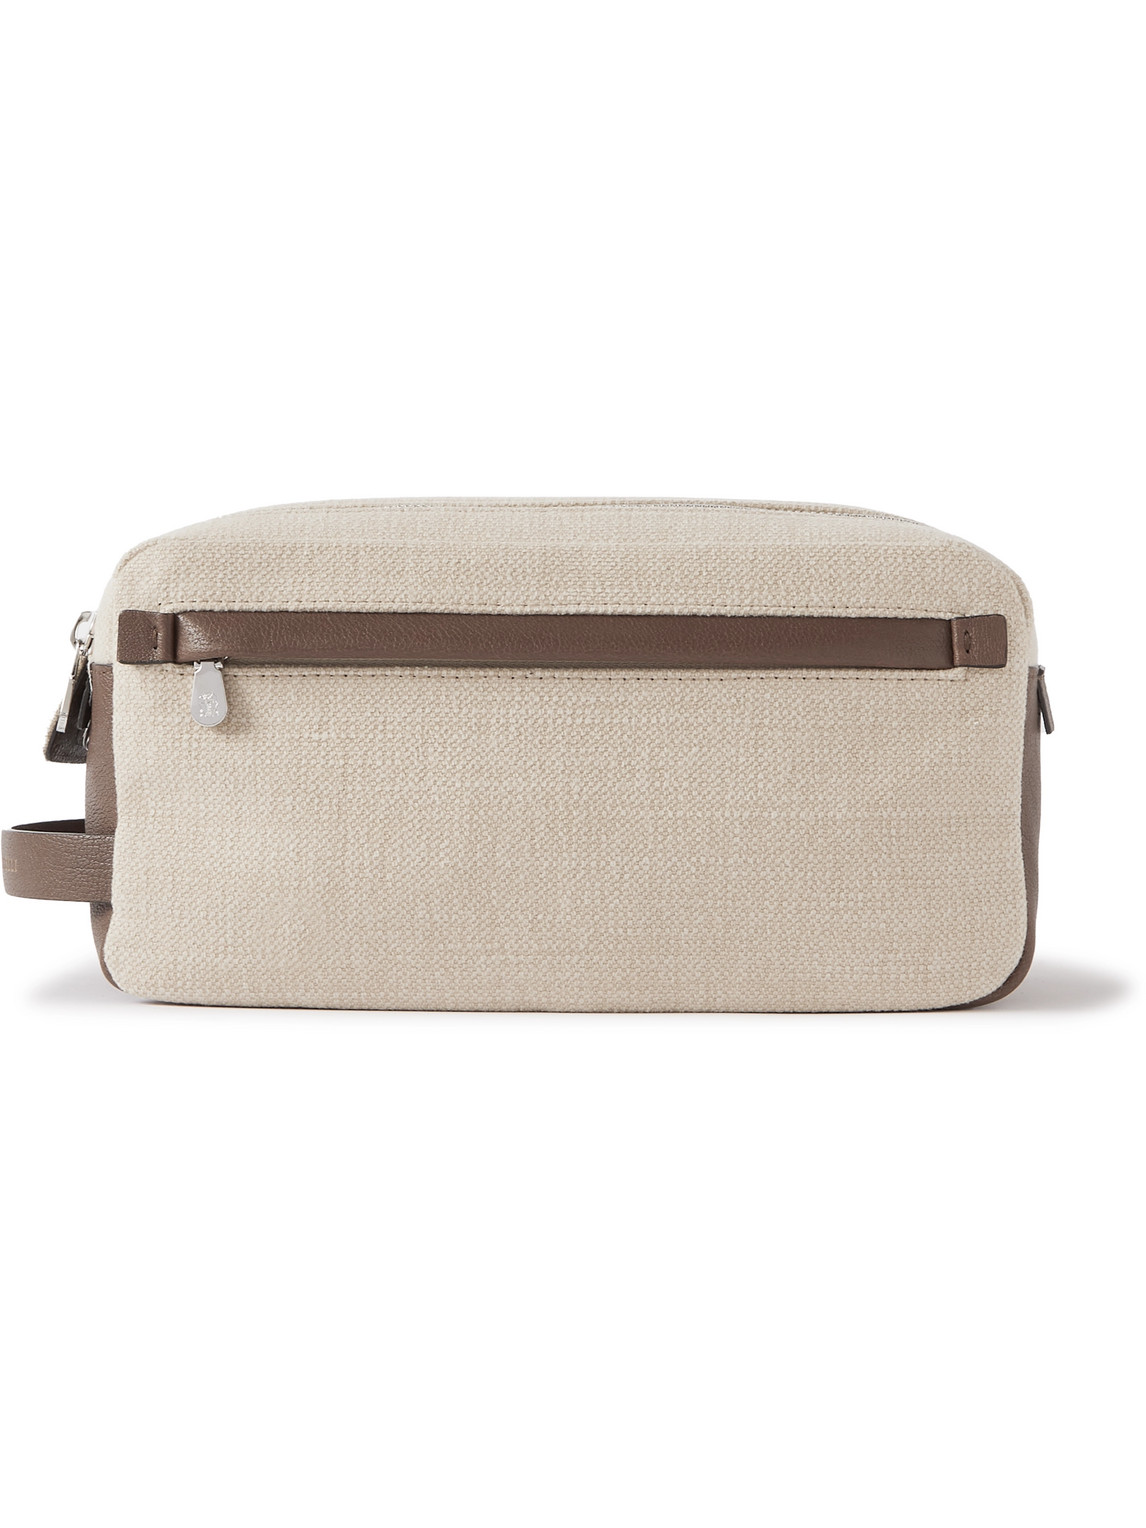 Brunello Cucinelli Leather-trimmed Cotton And Linen-blend Wash Bag In Neutrals